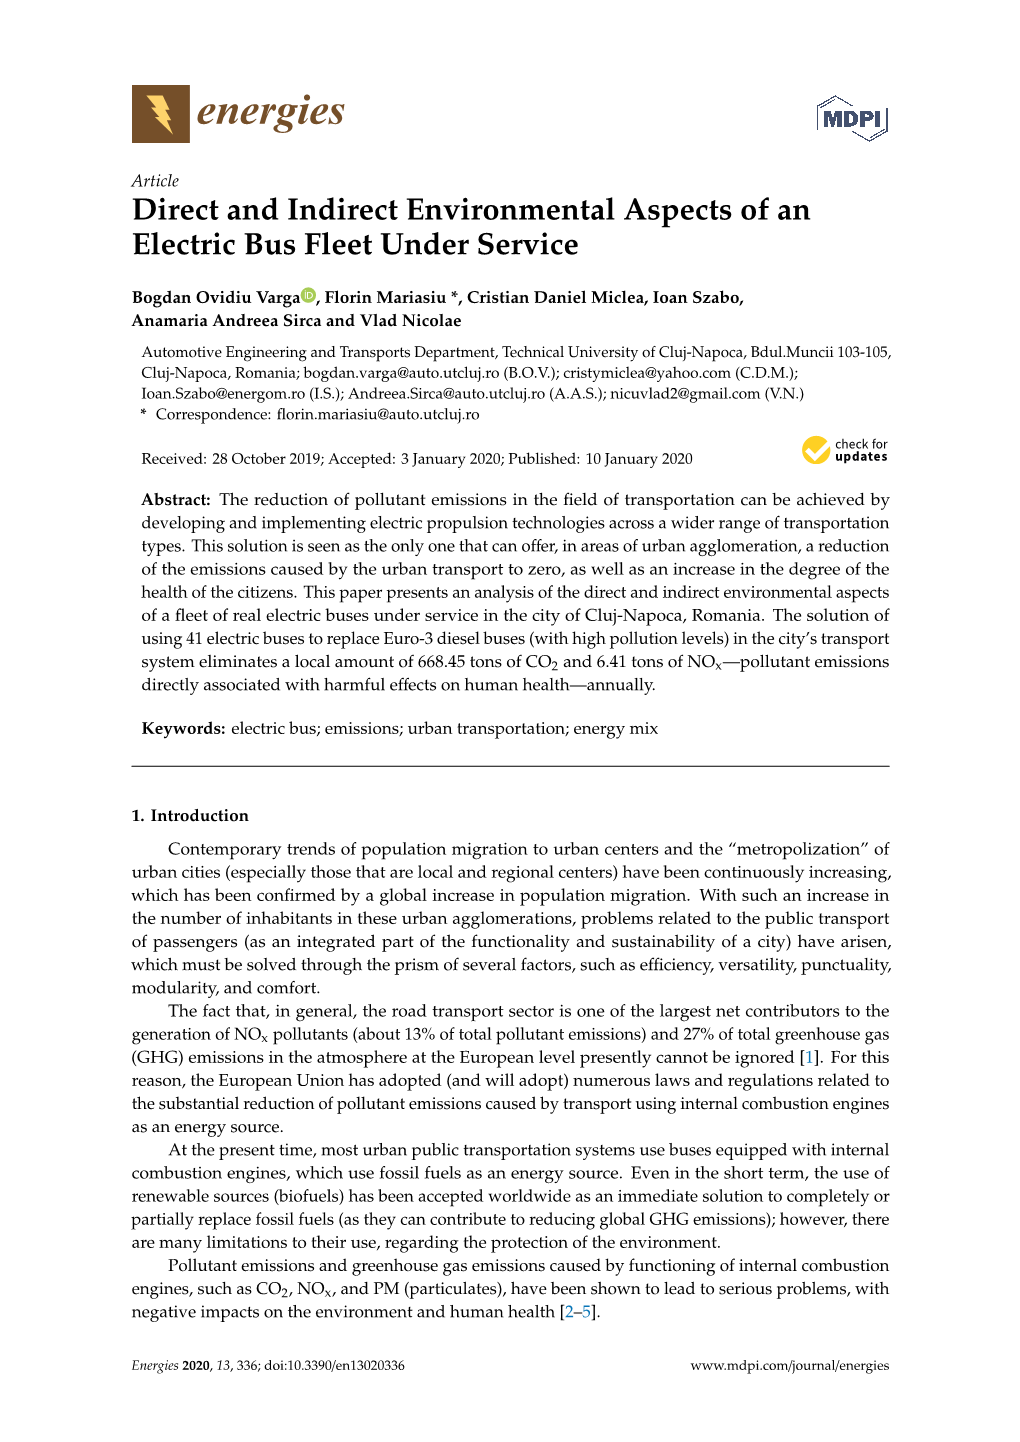 Direct and Indirect Environmental Aspects of an Electric Bus Fleet Under Service